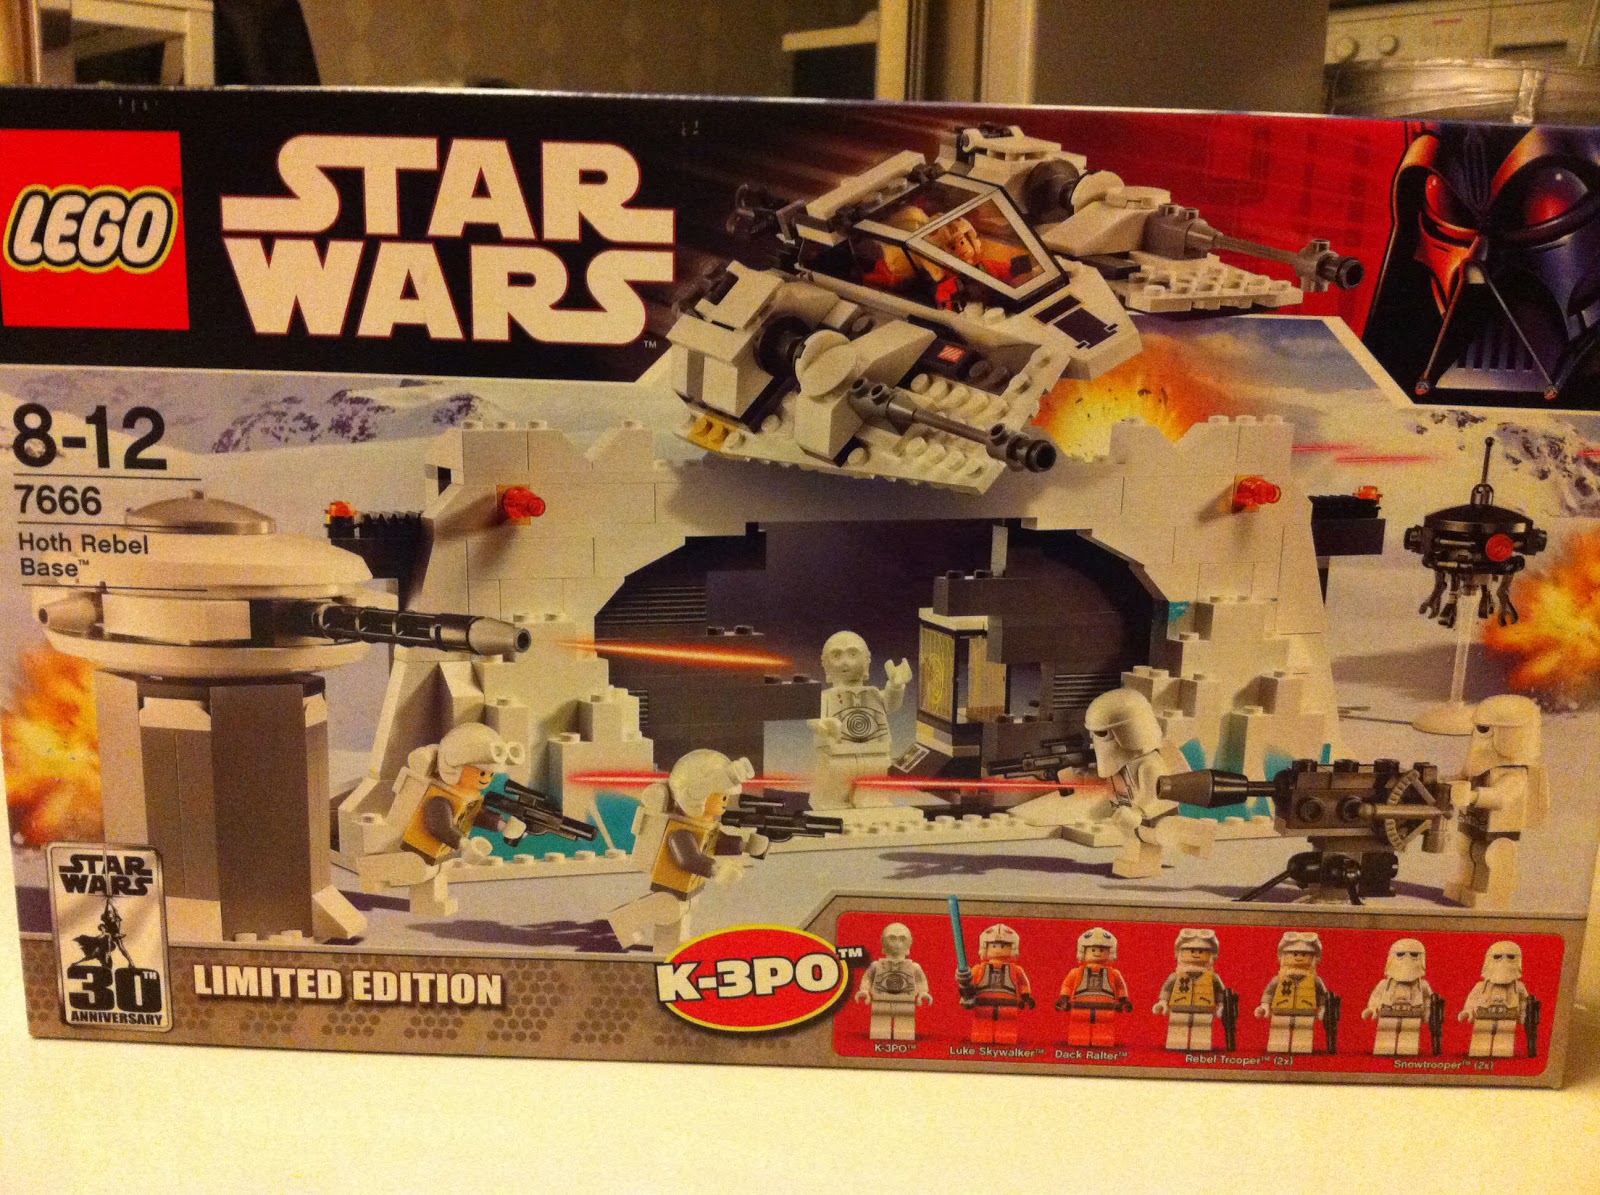 The of LEGO Star Wars: Review: 7666 Rebel Base